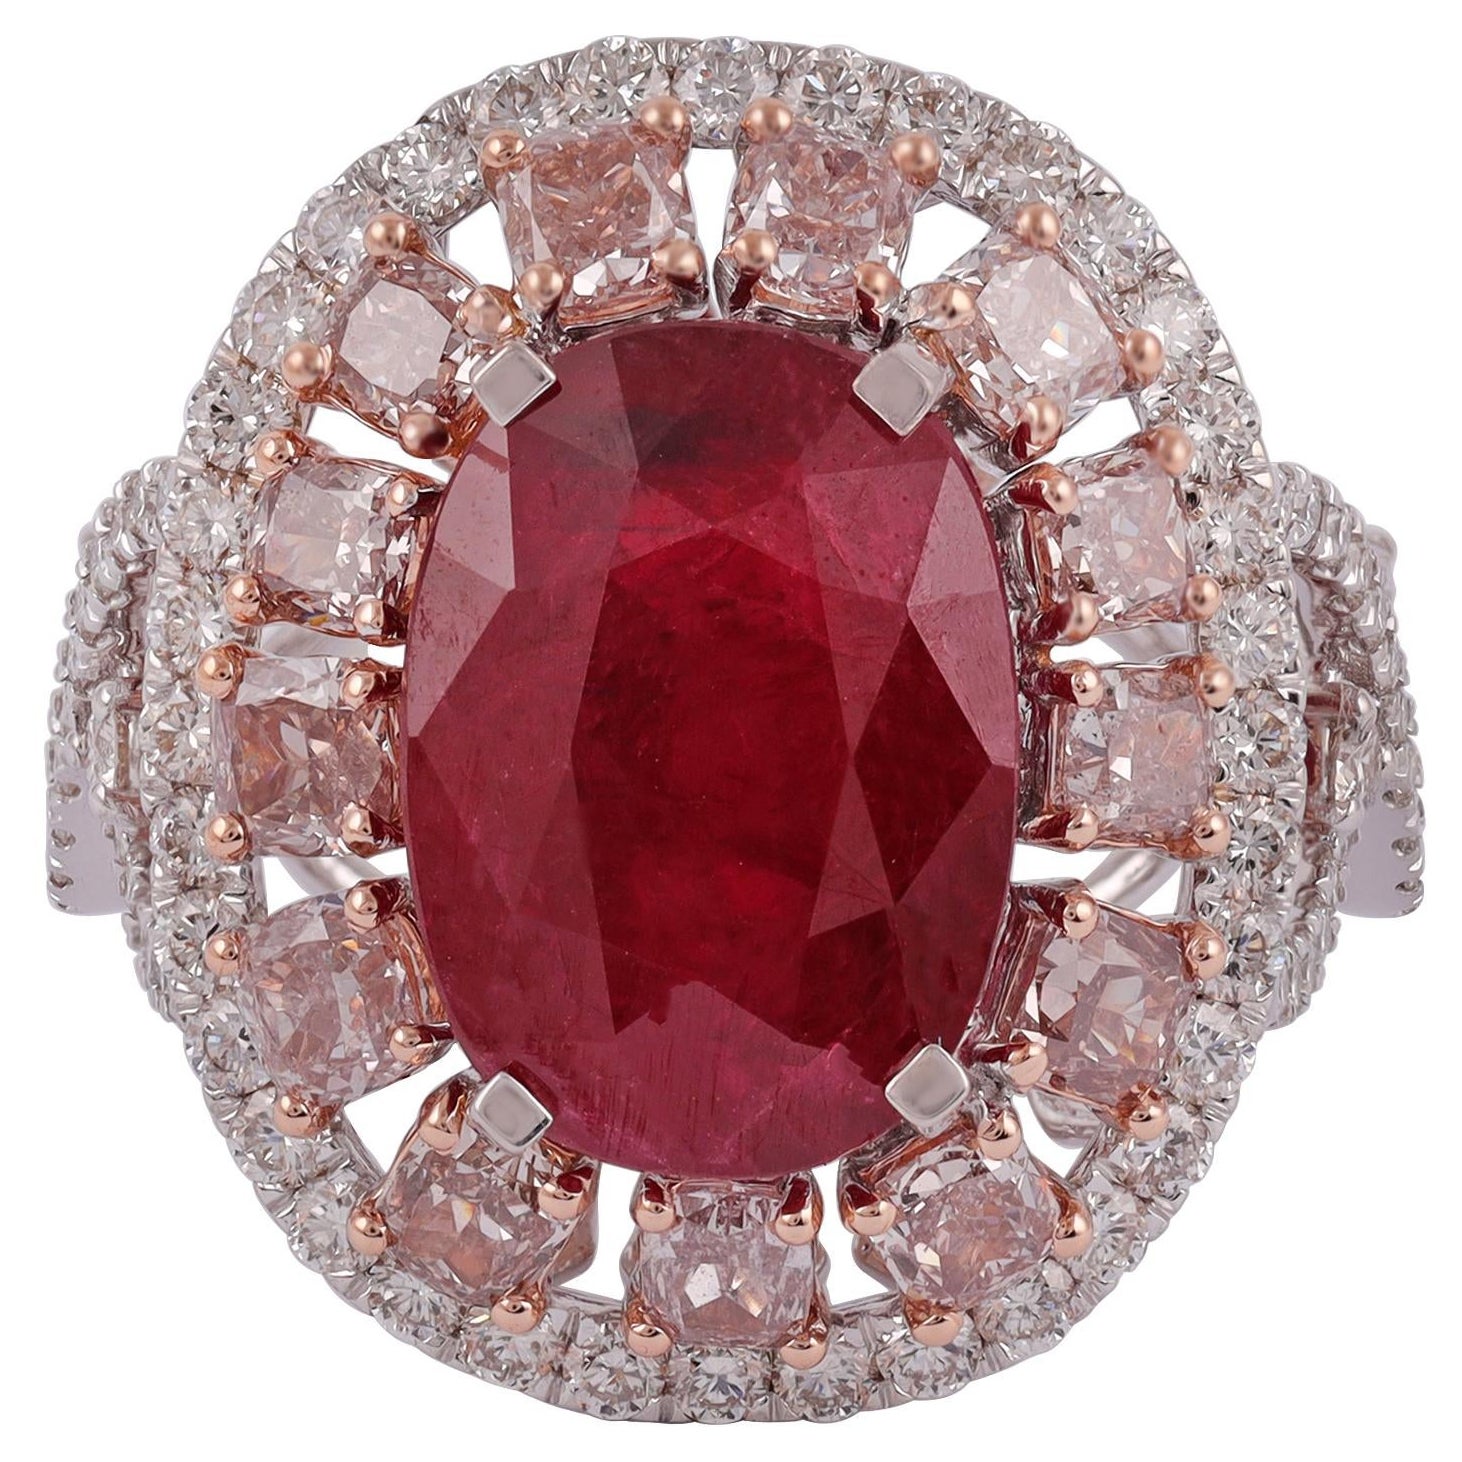 5.91 Cts Mozambique Ruby and Pink Diamond Classic Ring Set in 18k White Gold